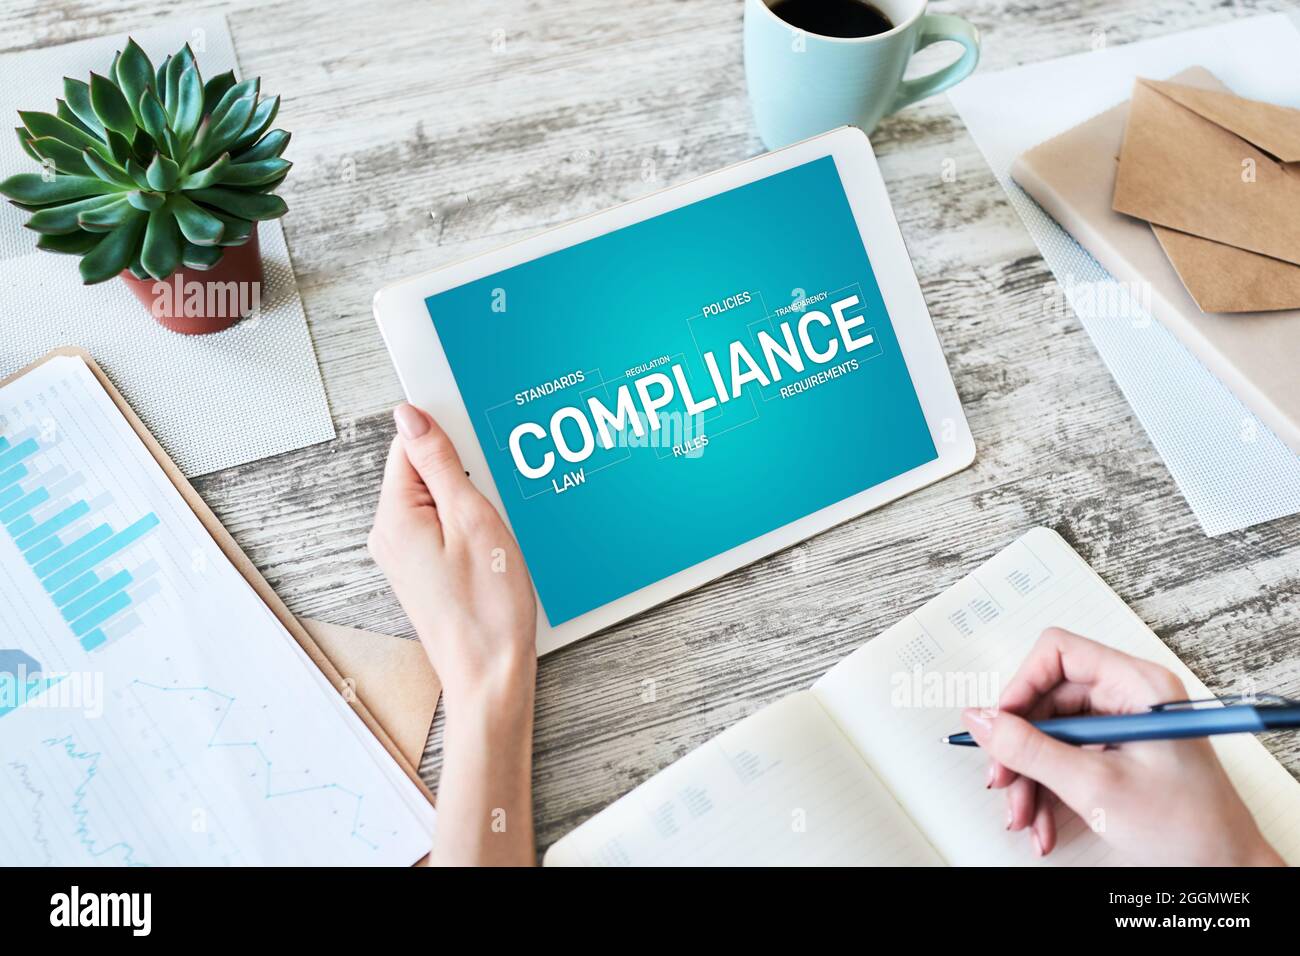 Compliance concept with icons and diagrams. Regulations, law, standards, requirements, audit. Concept on device screen. Stock Photo